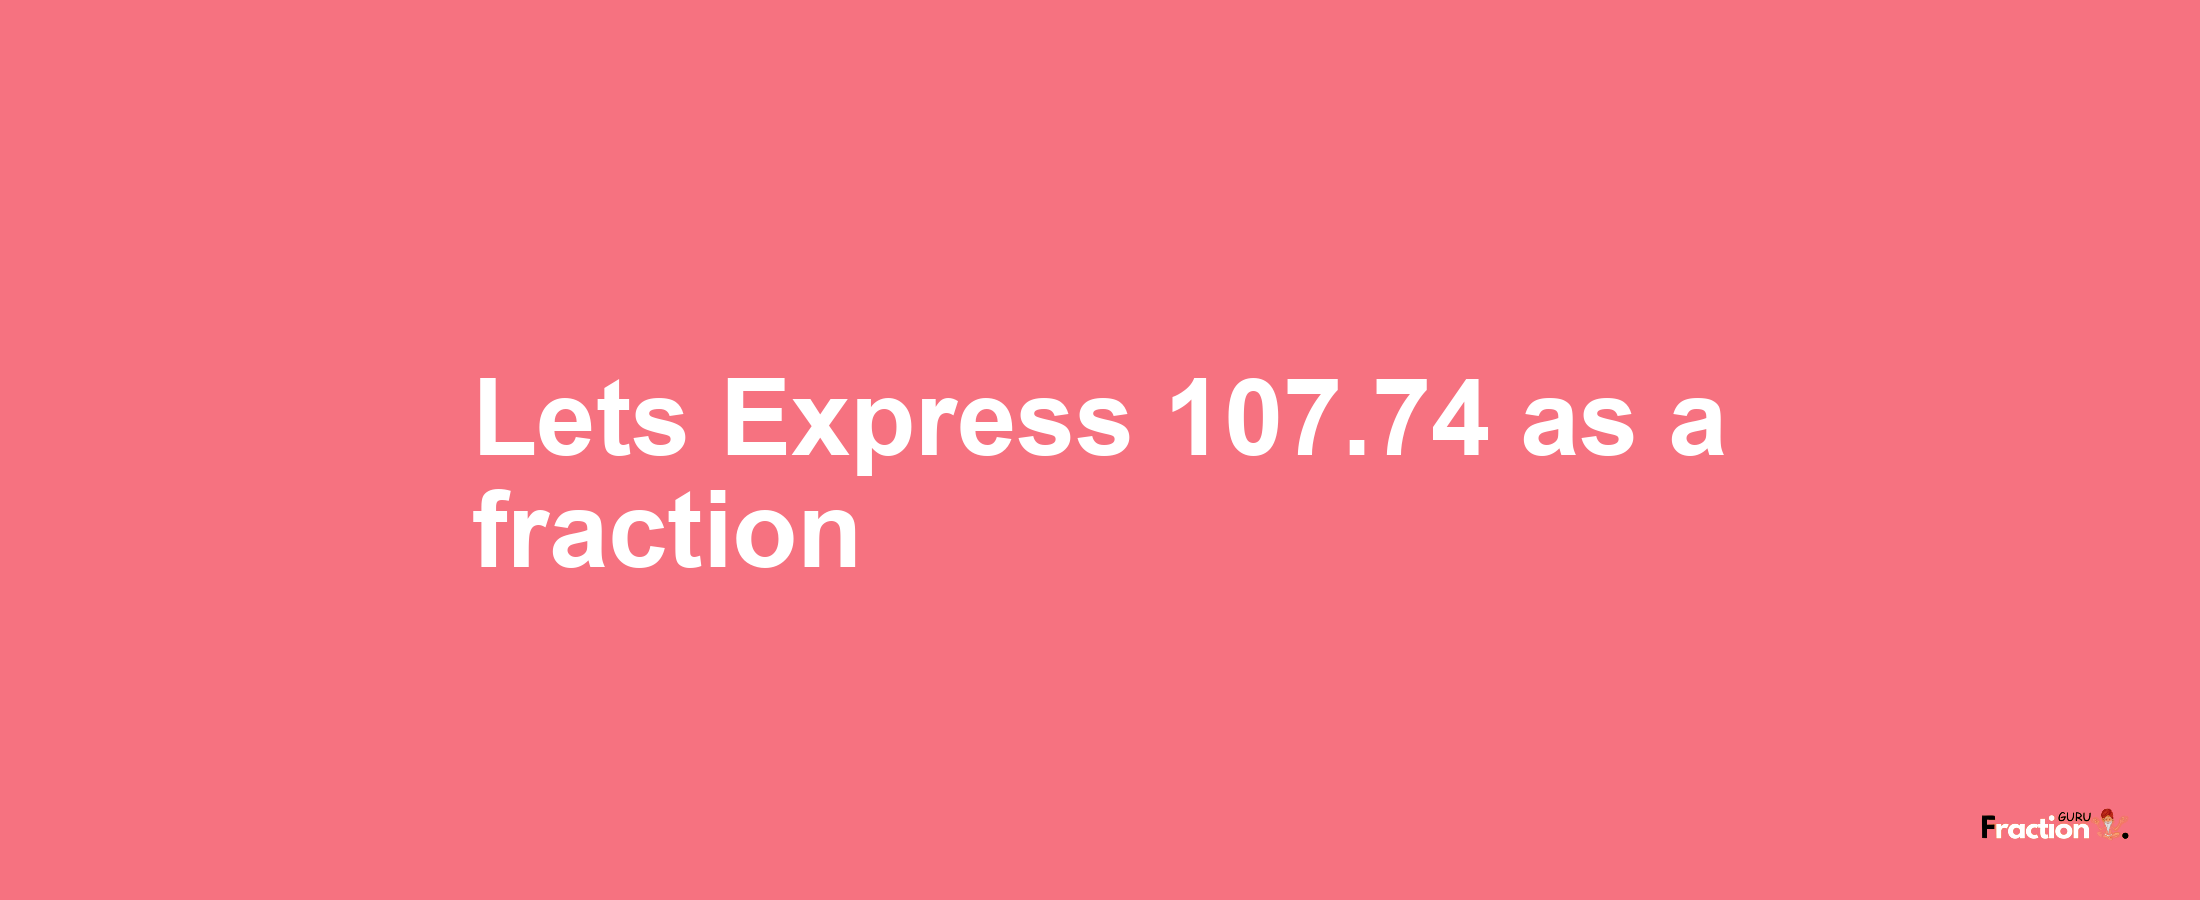 Lets Express 107.74 as afraction